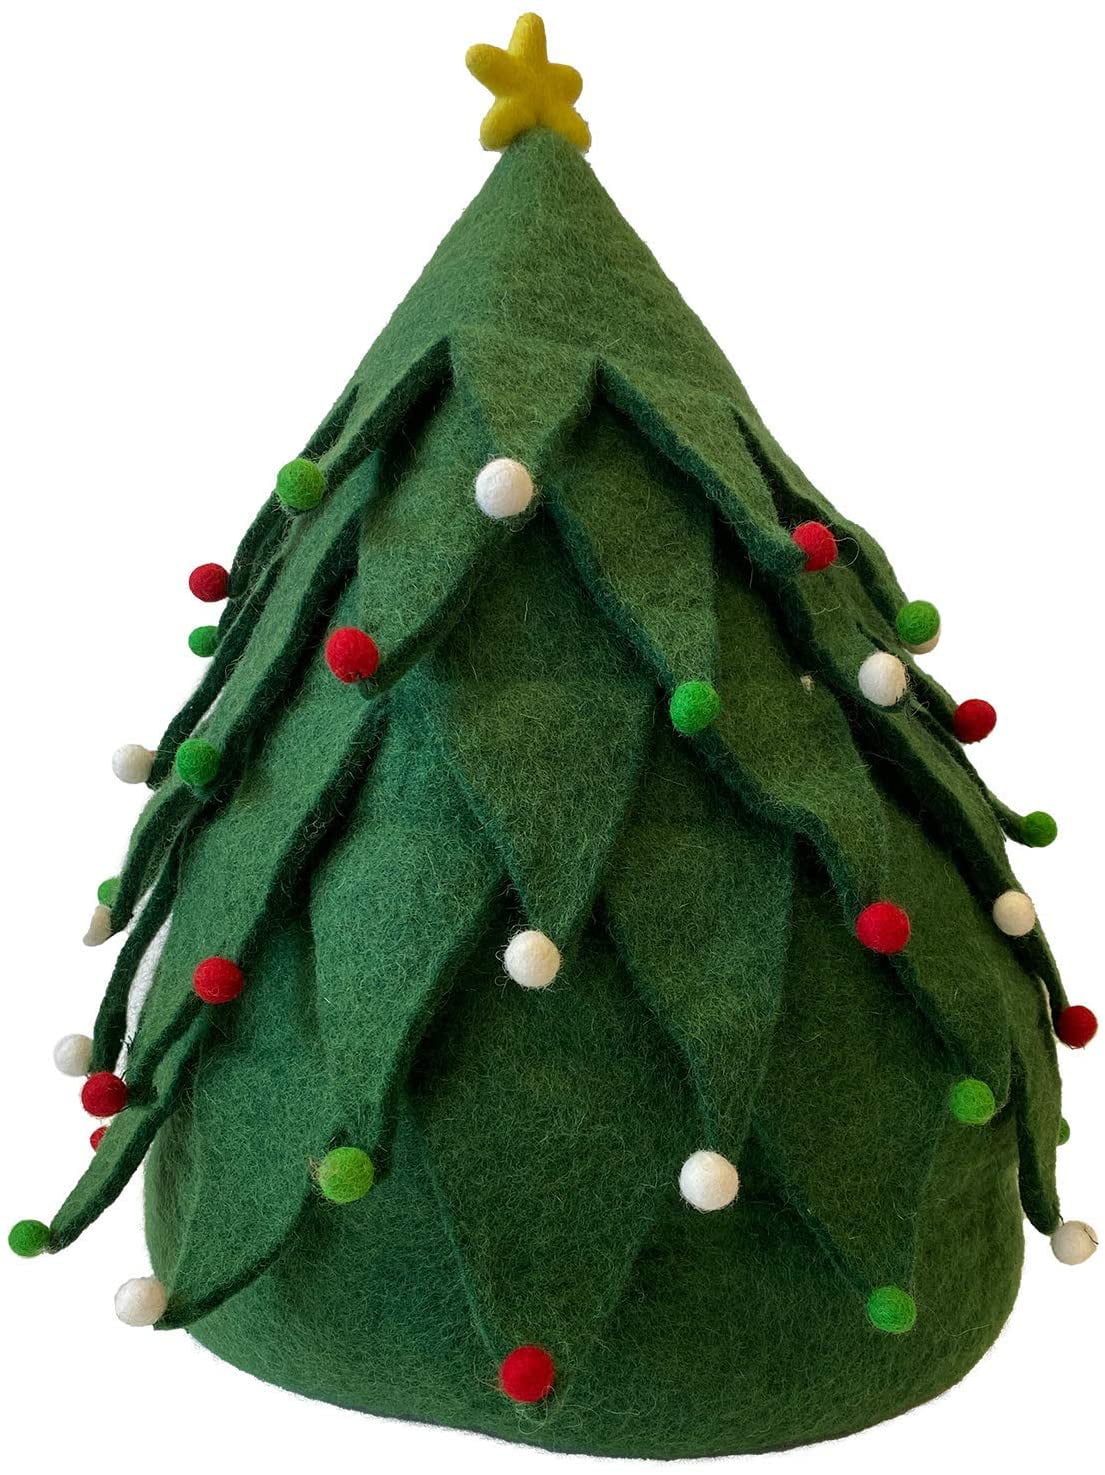 Great for the Tree in Your Man Cave or Game Room 15-Ball Textured Christmas Ornament